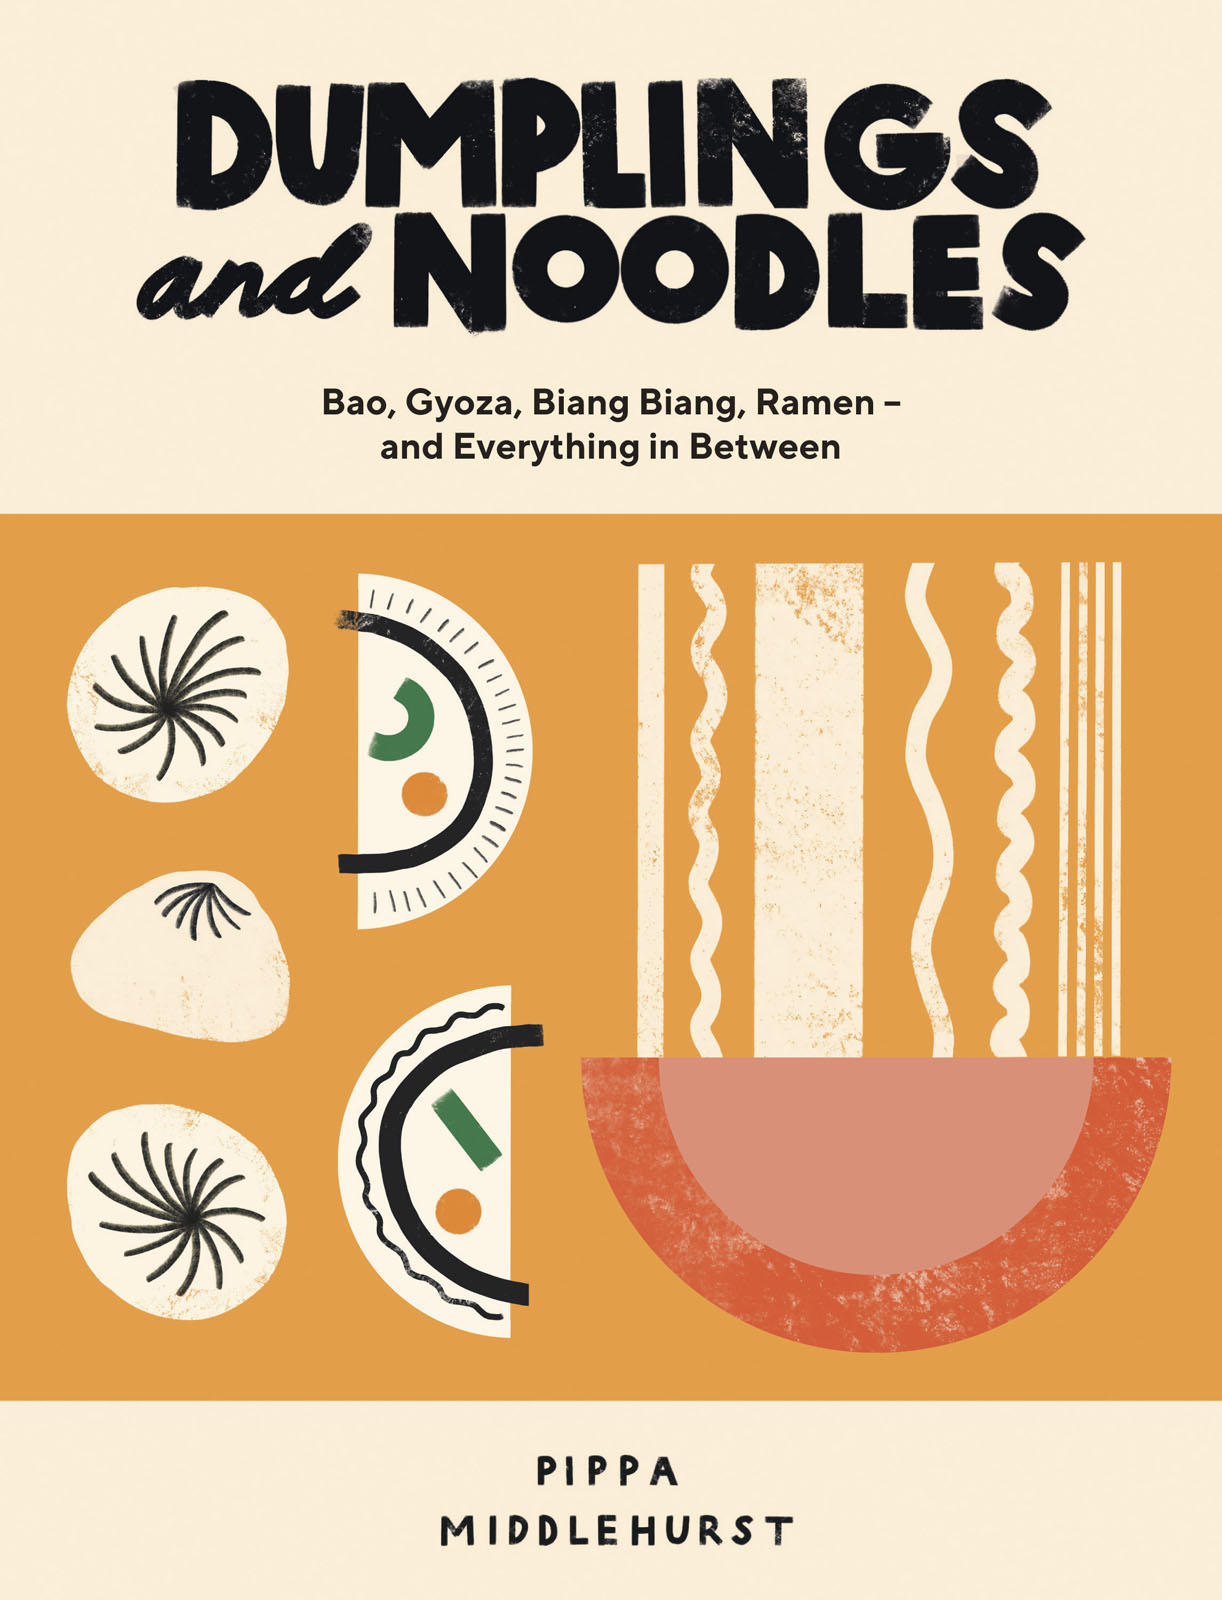 Dumplings And Noodles by Pippa Middlehurst